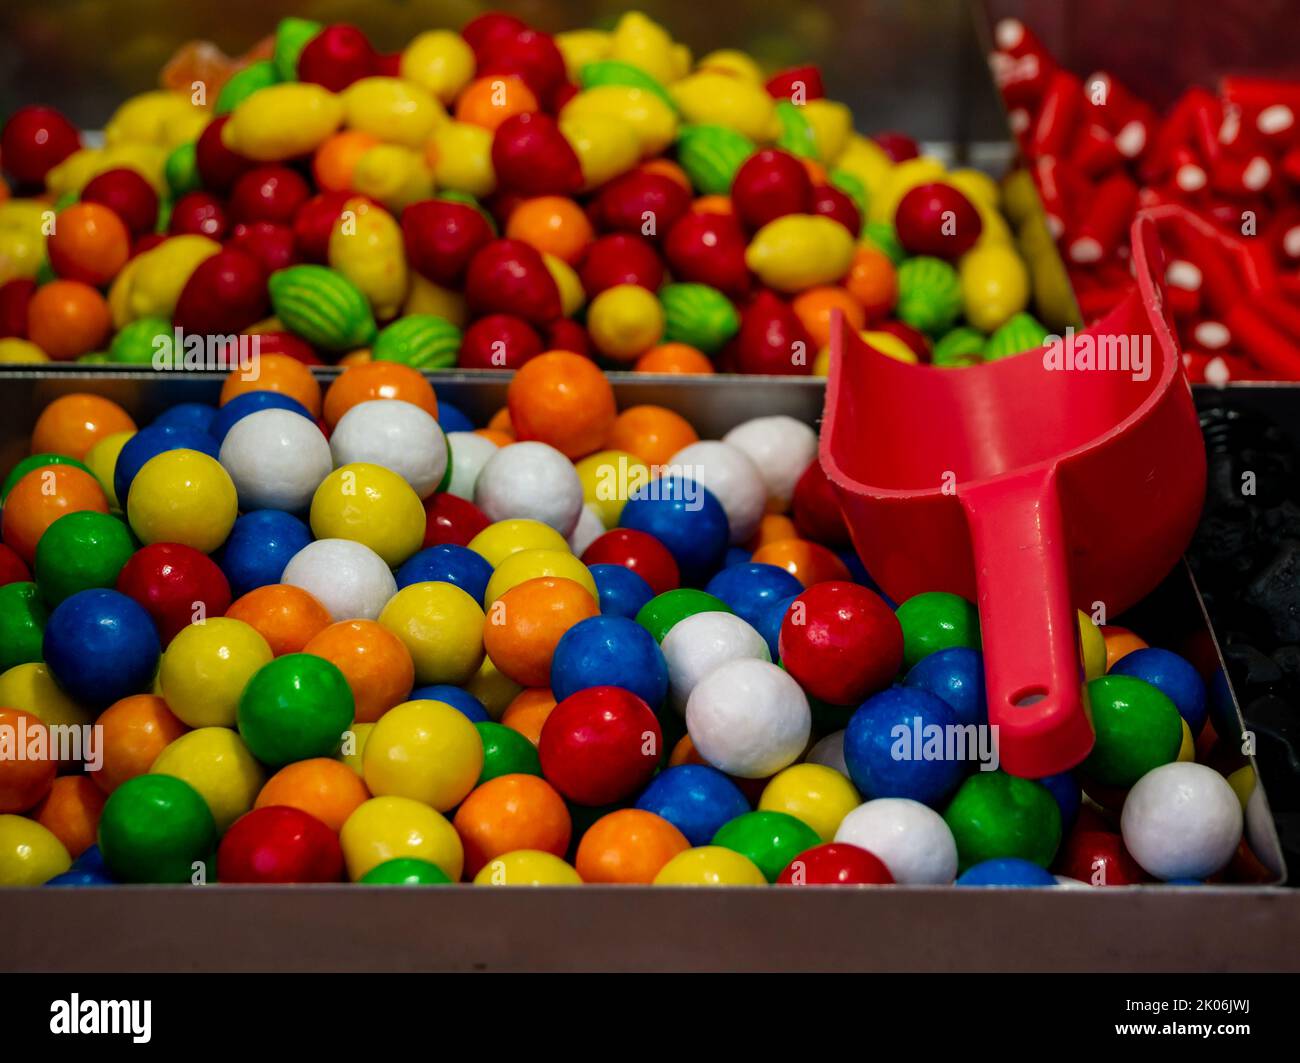 close-up shot variety of colorful candy balls of various flavor Stock Photo